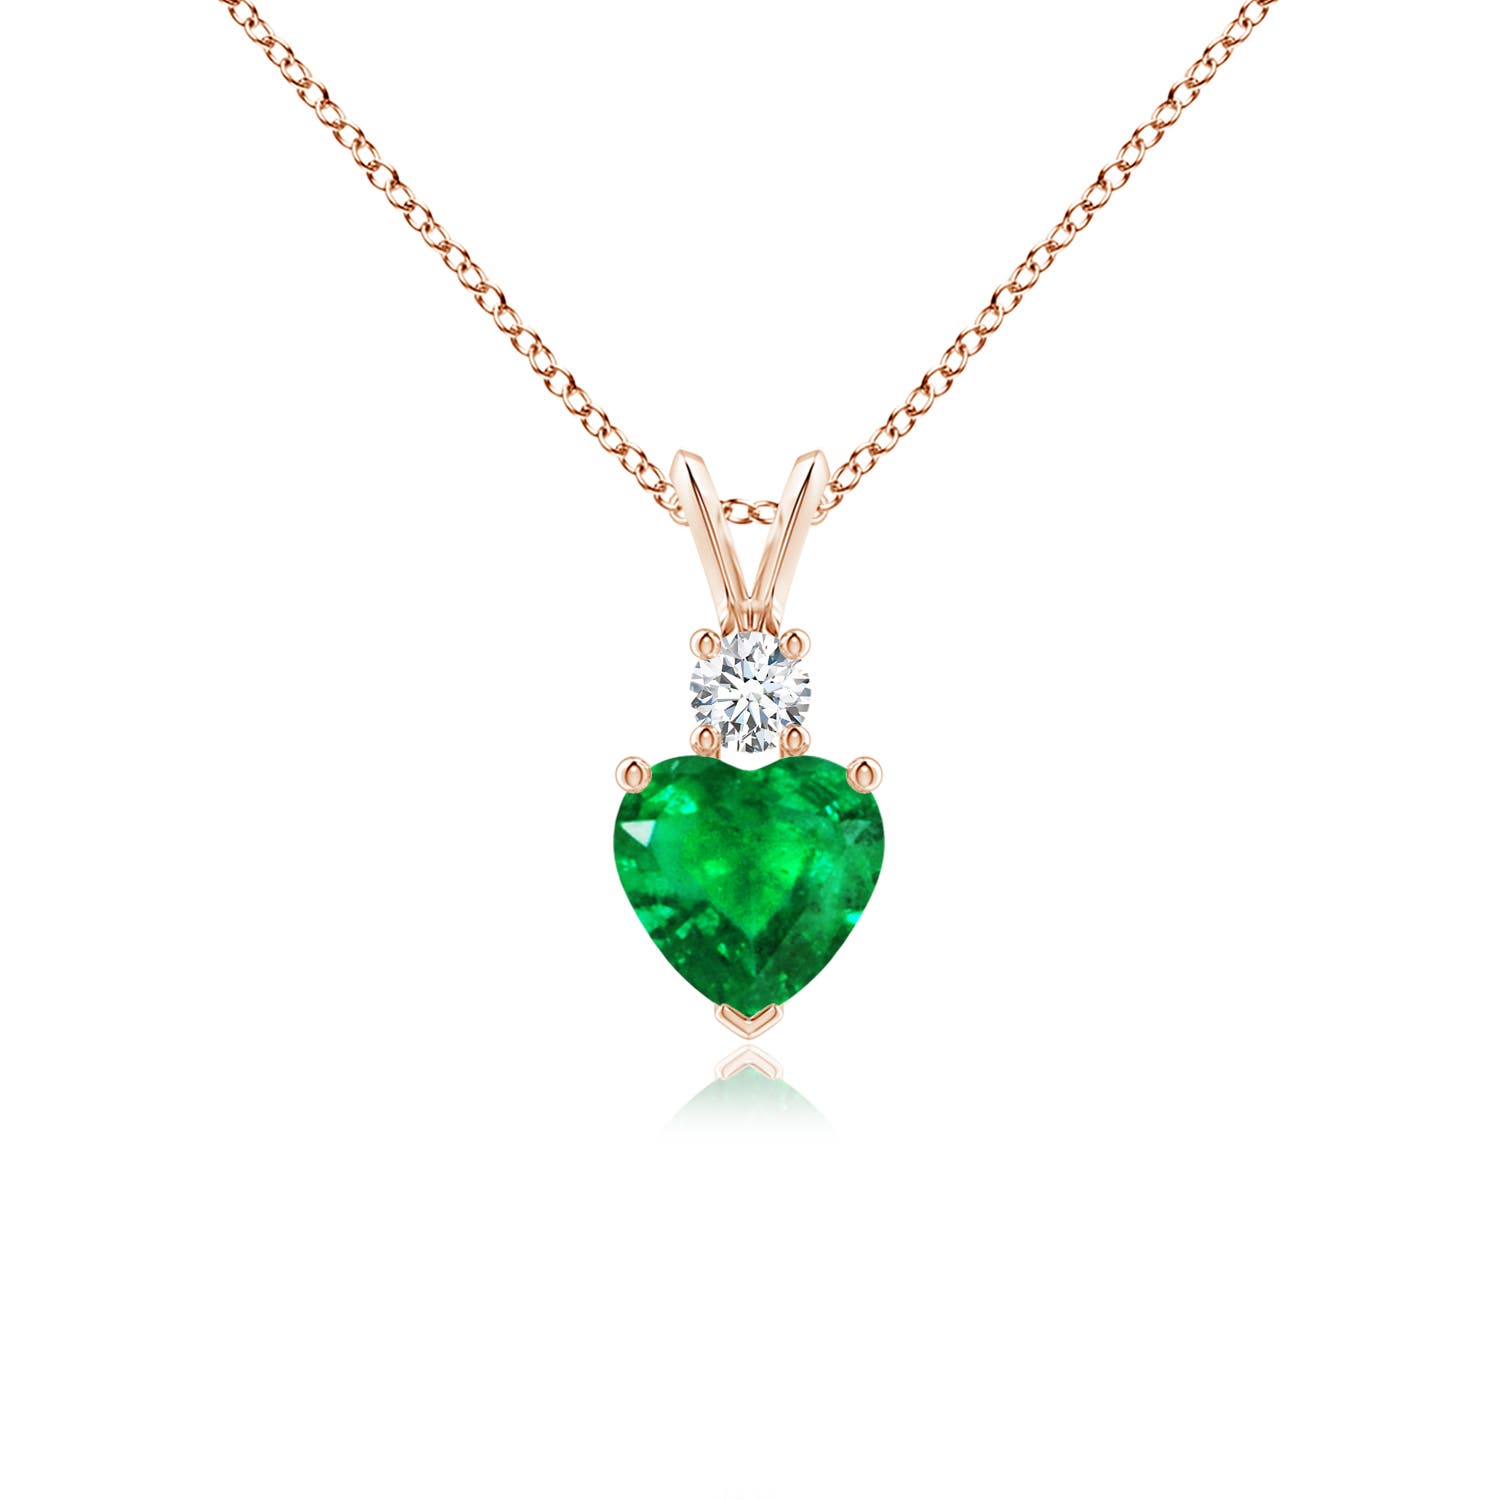 AAA - Emerald / 0.68 CT / 14 KT Rose Gold